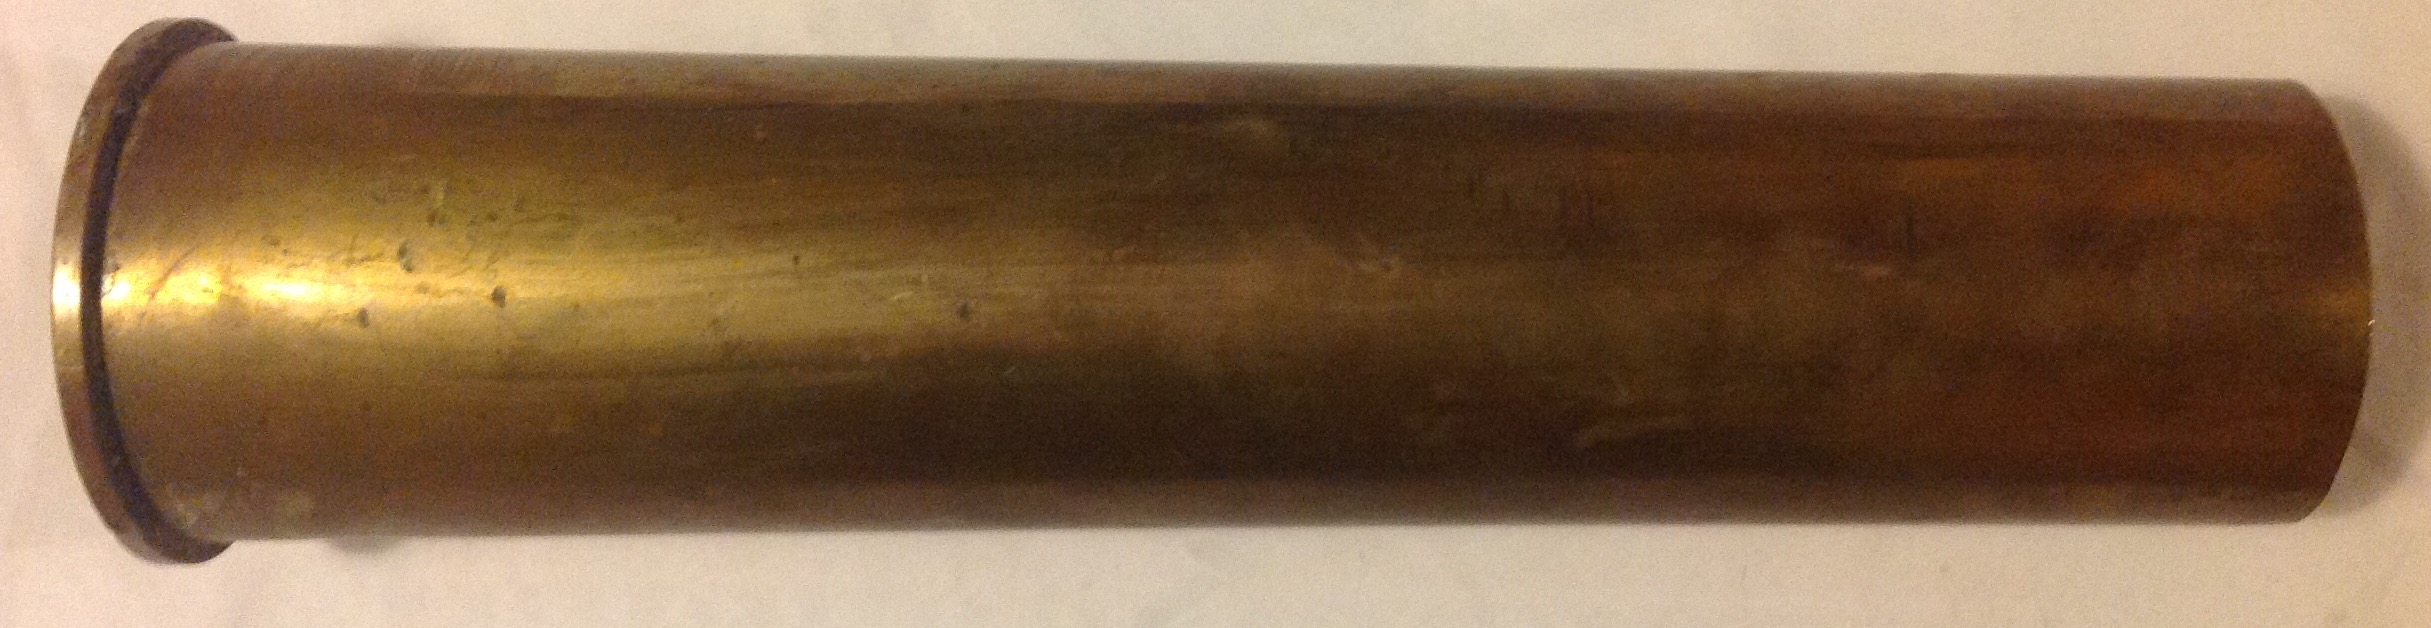 6 Pounder Blank Shell Casing – Tales from the Supply Depot